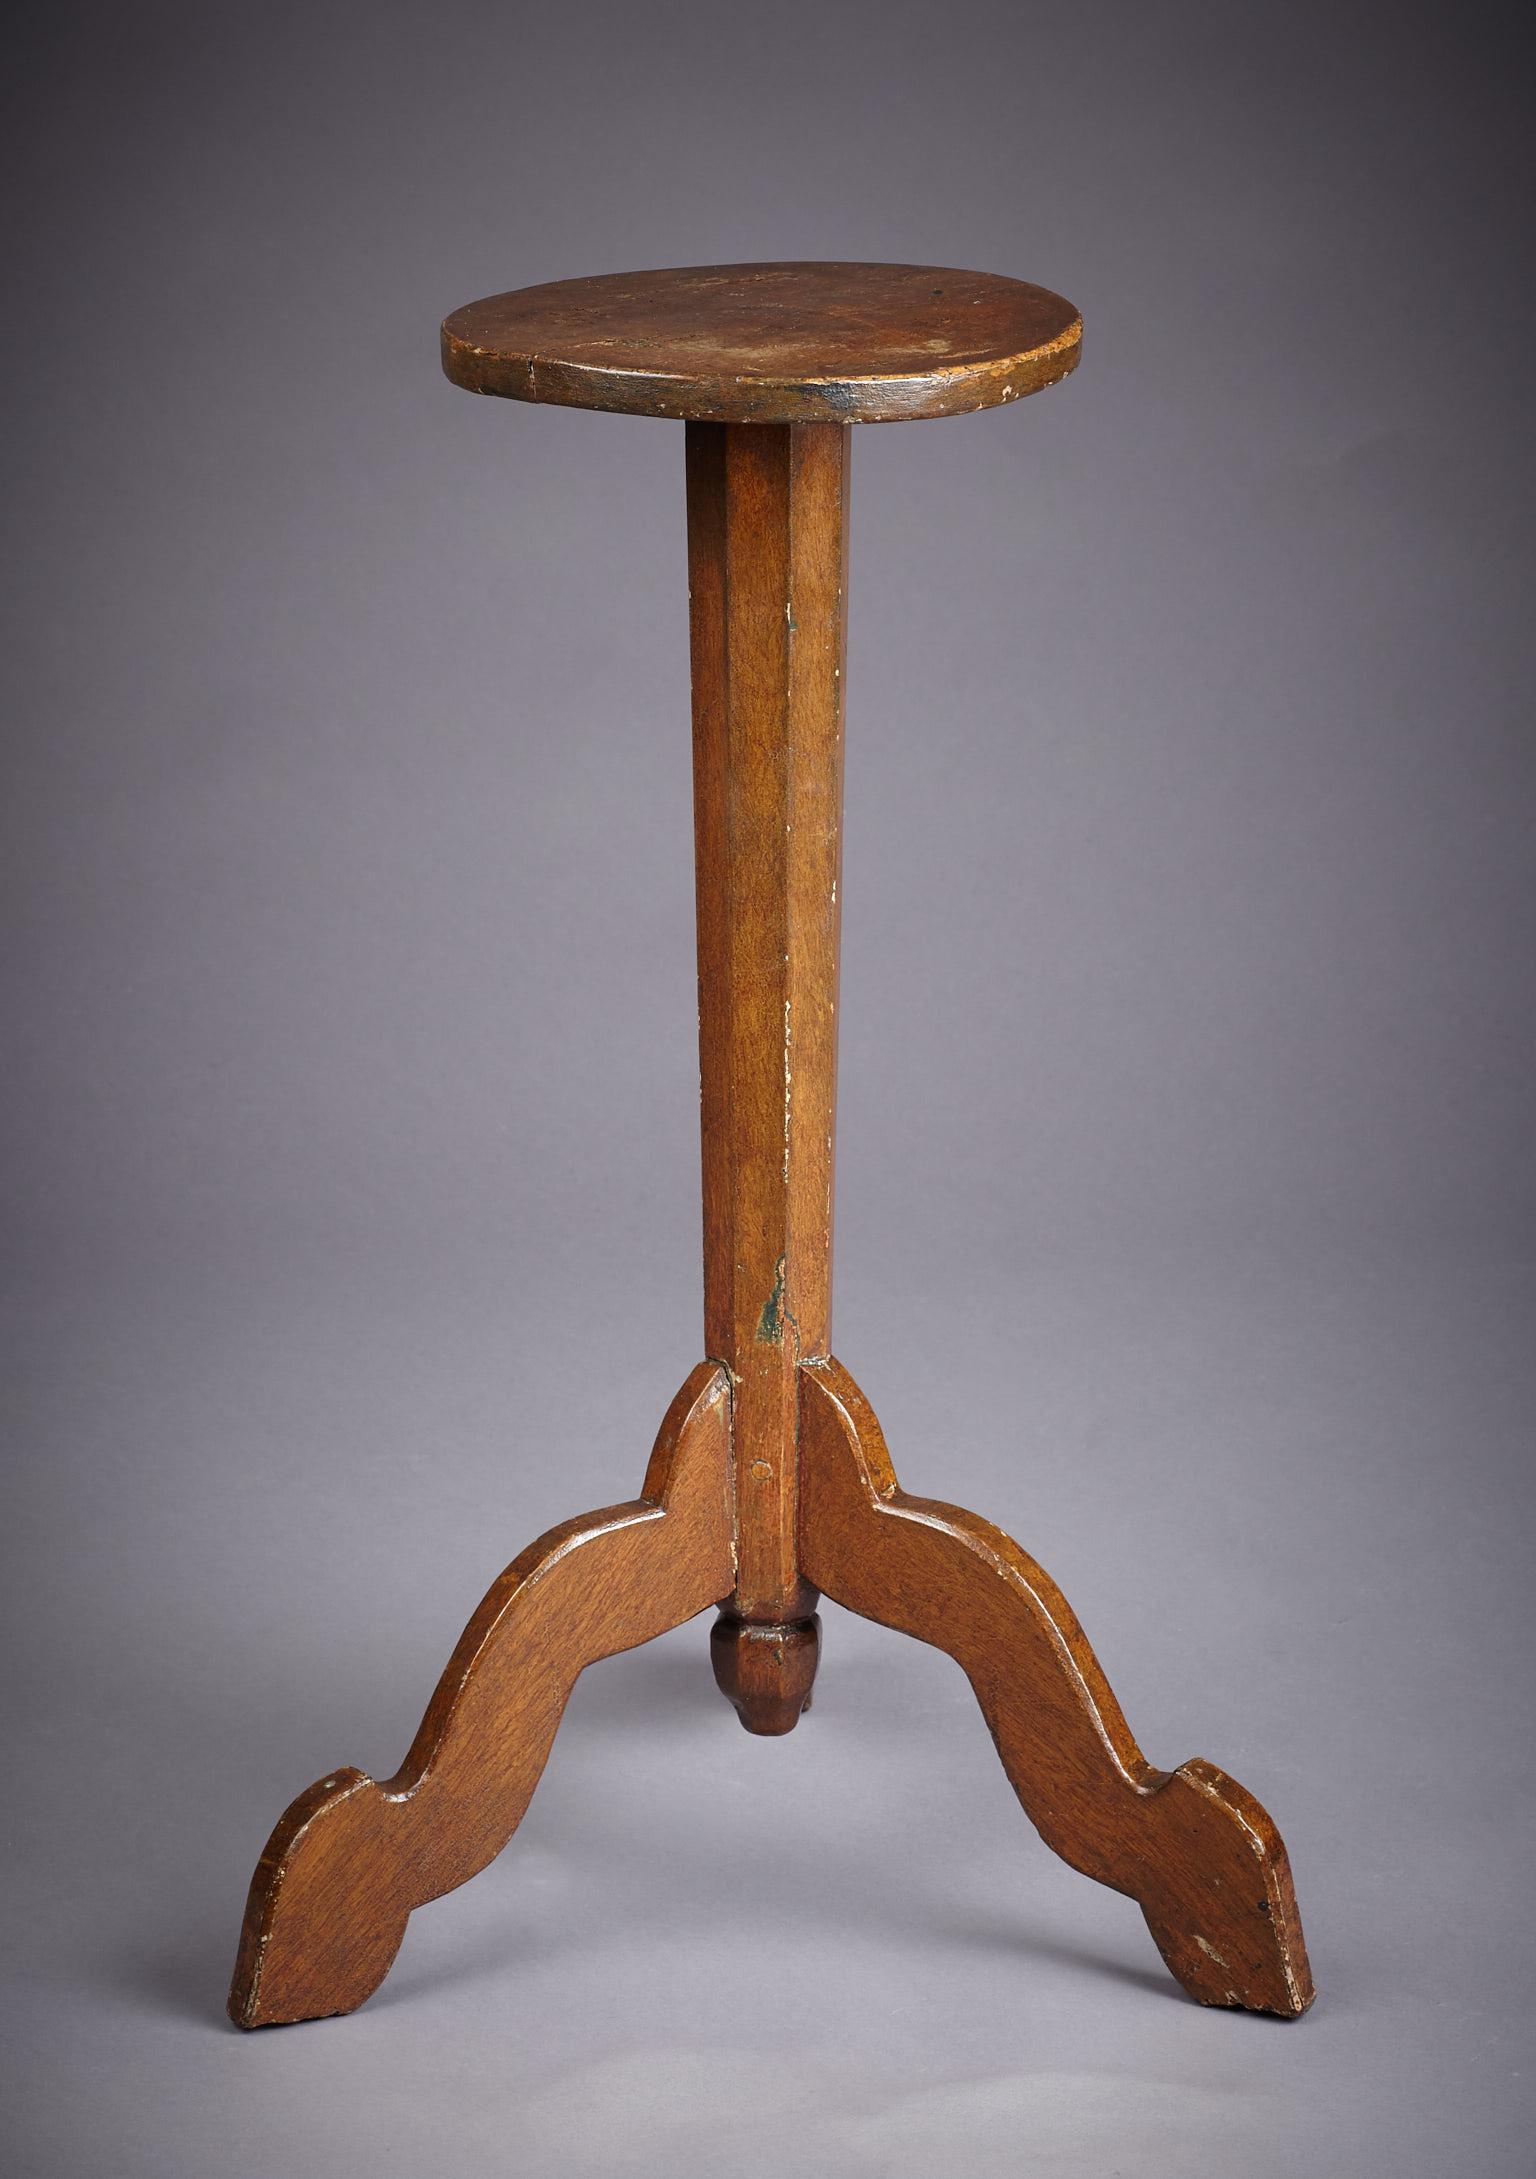 Painted Oak Candle-Stand, Early 18th Century, Queen Anne, England, circa 1710 (Volkskunst) im Angebot